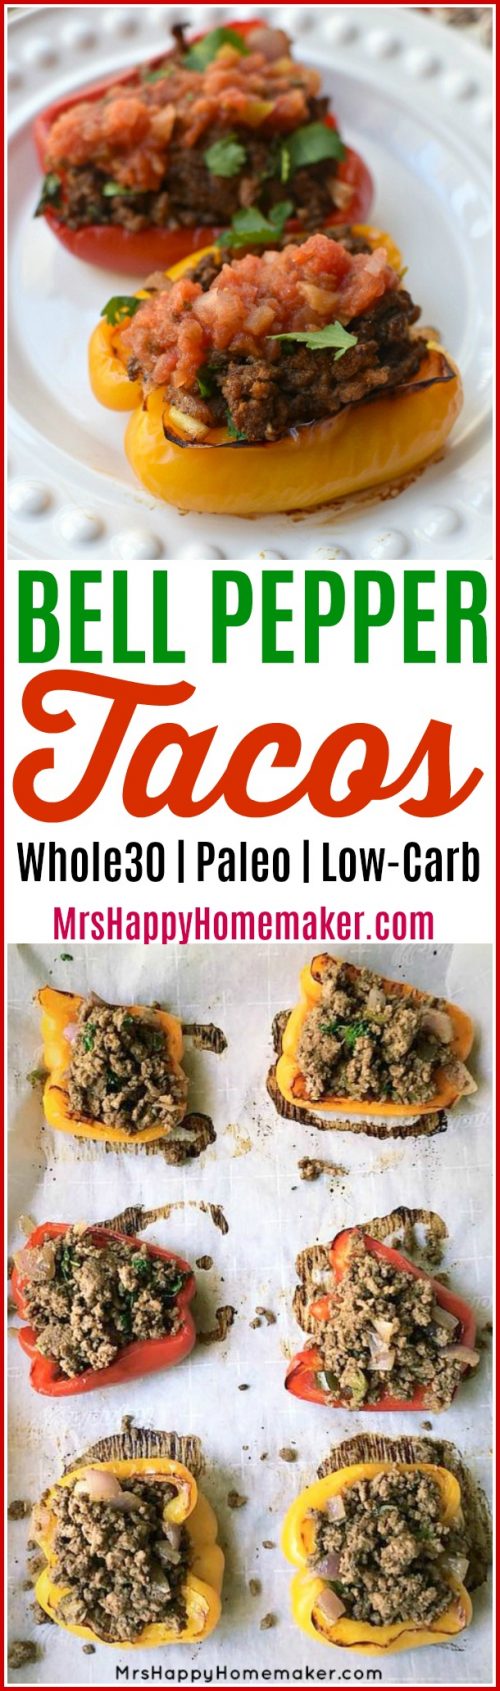 Bell Pepper Tacos - Whole30 | Paleo | Low-Carb - MrsHappyHomemaker.com